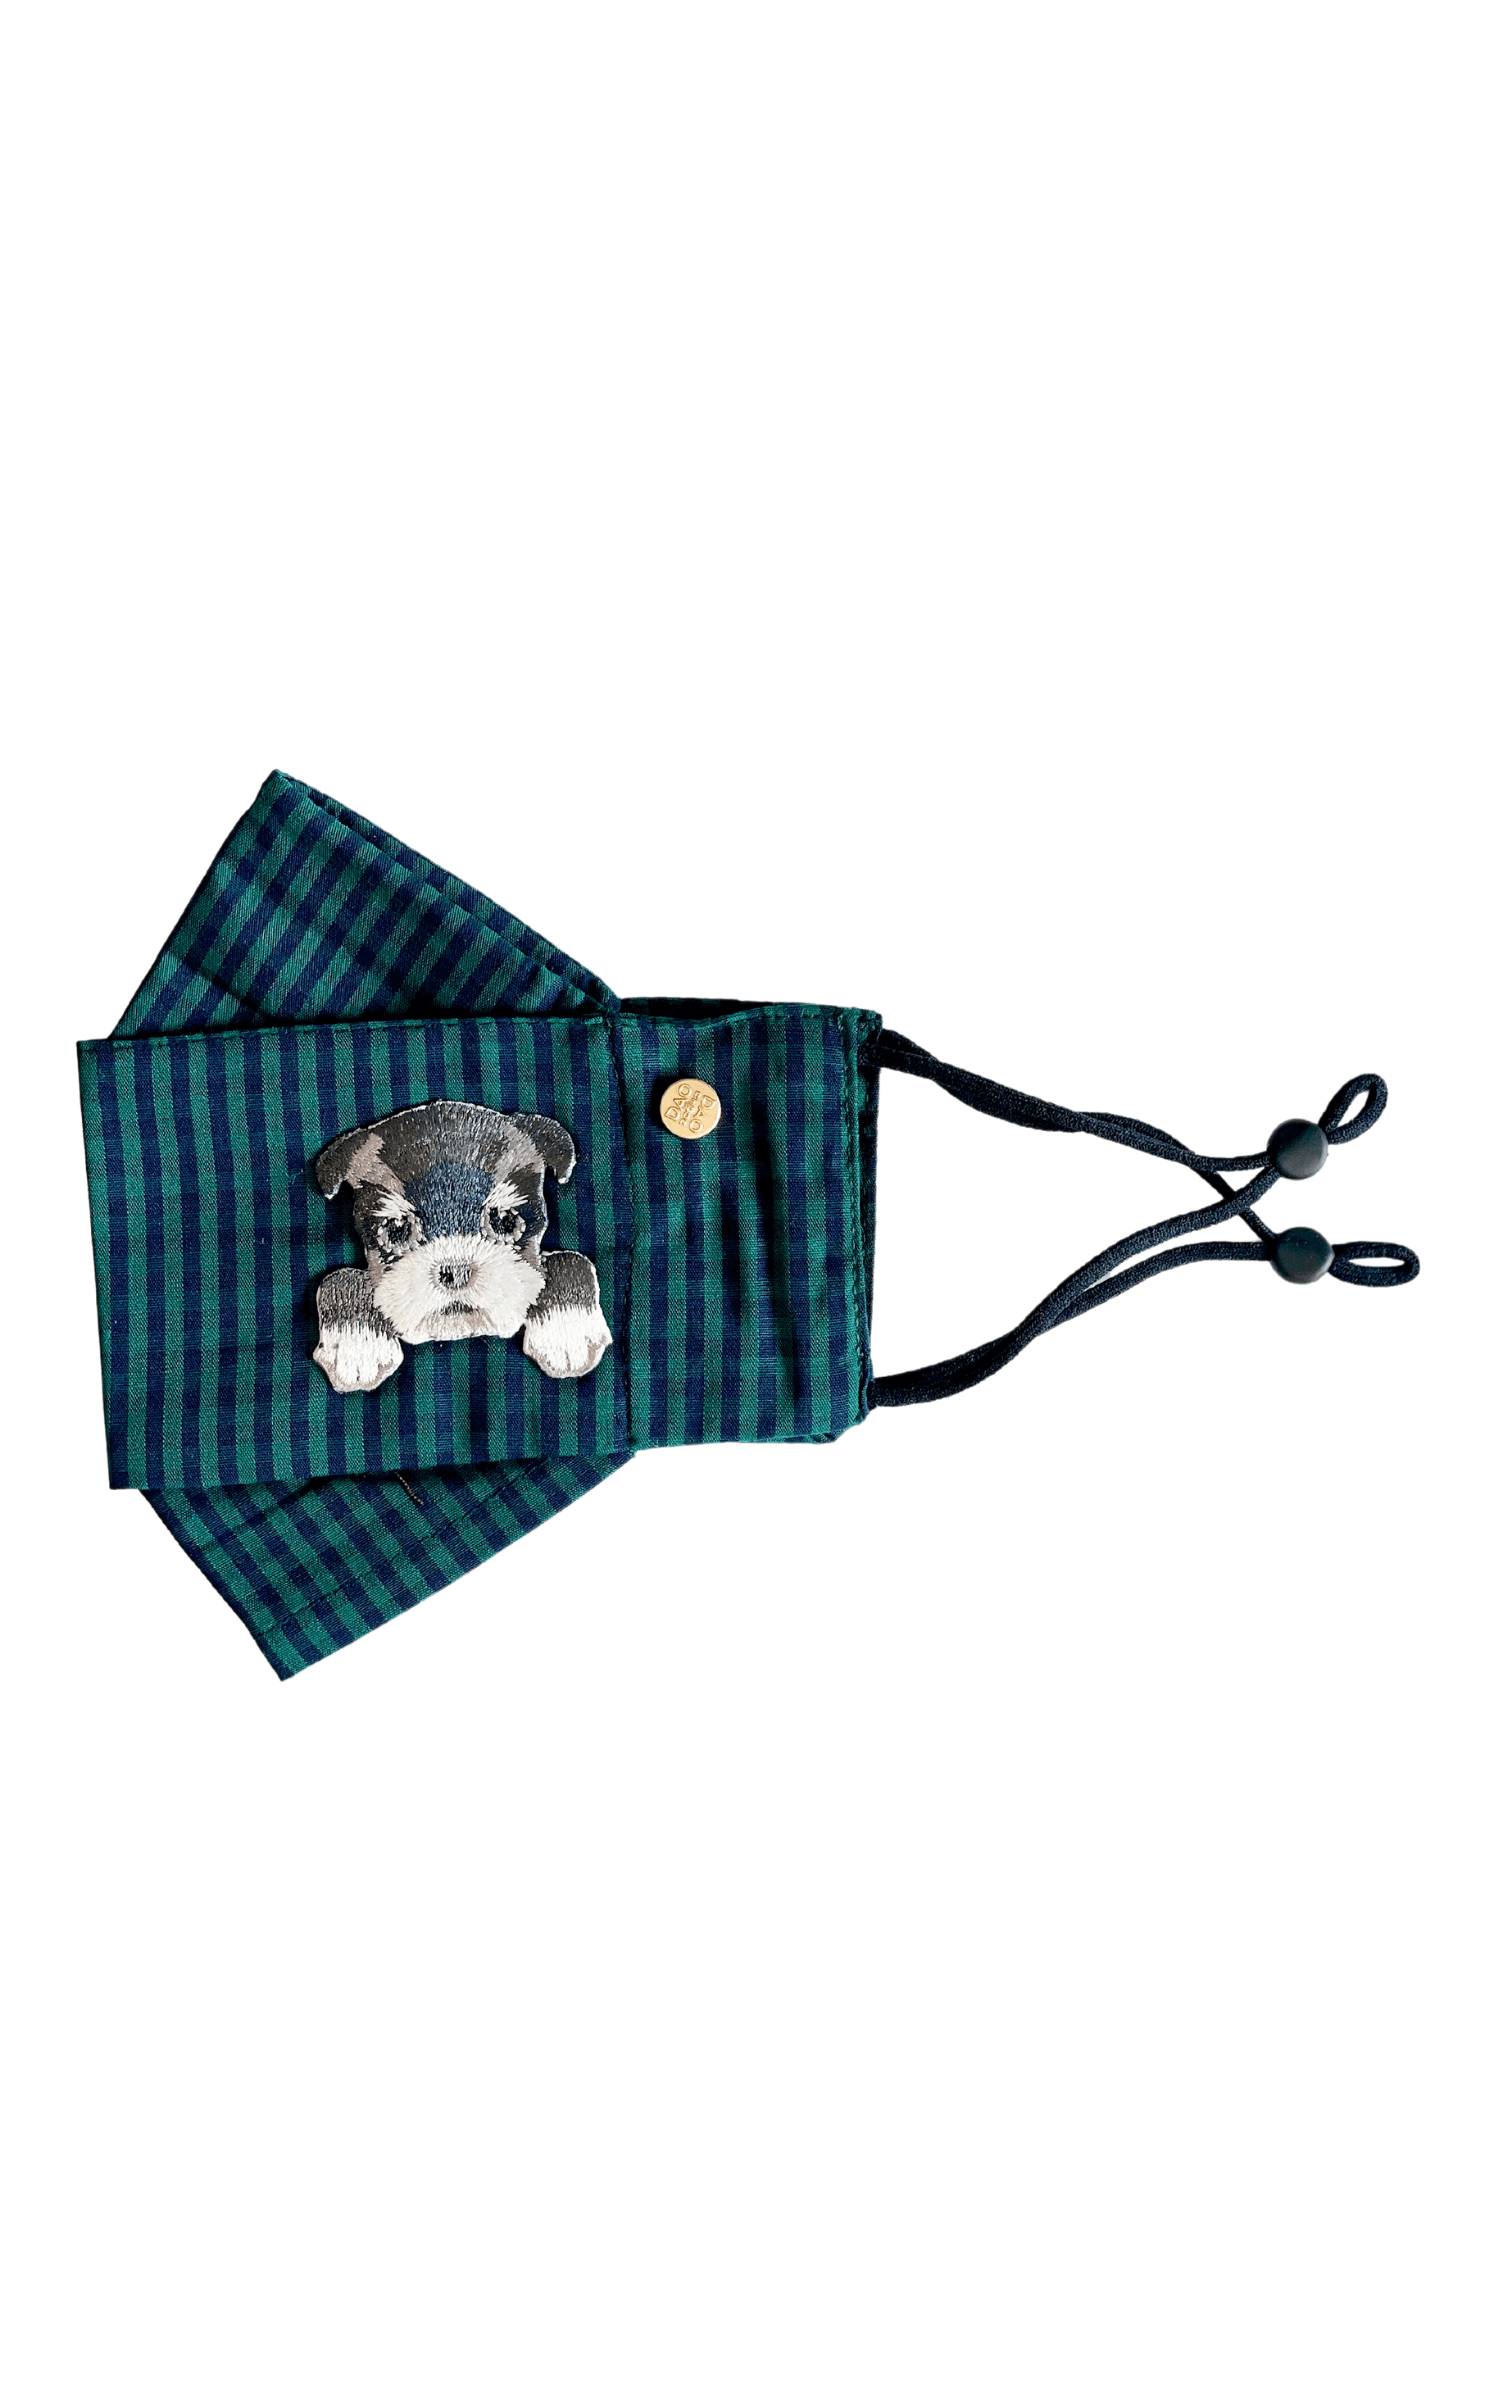 Box Pleated Face Masks Yorkie Green Gingham Box Pleat Mask ( w Filter Pocket) - Chloe Dao